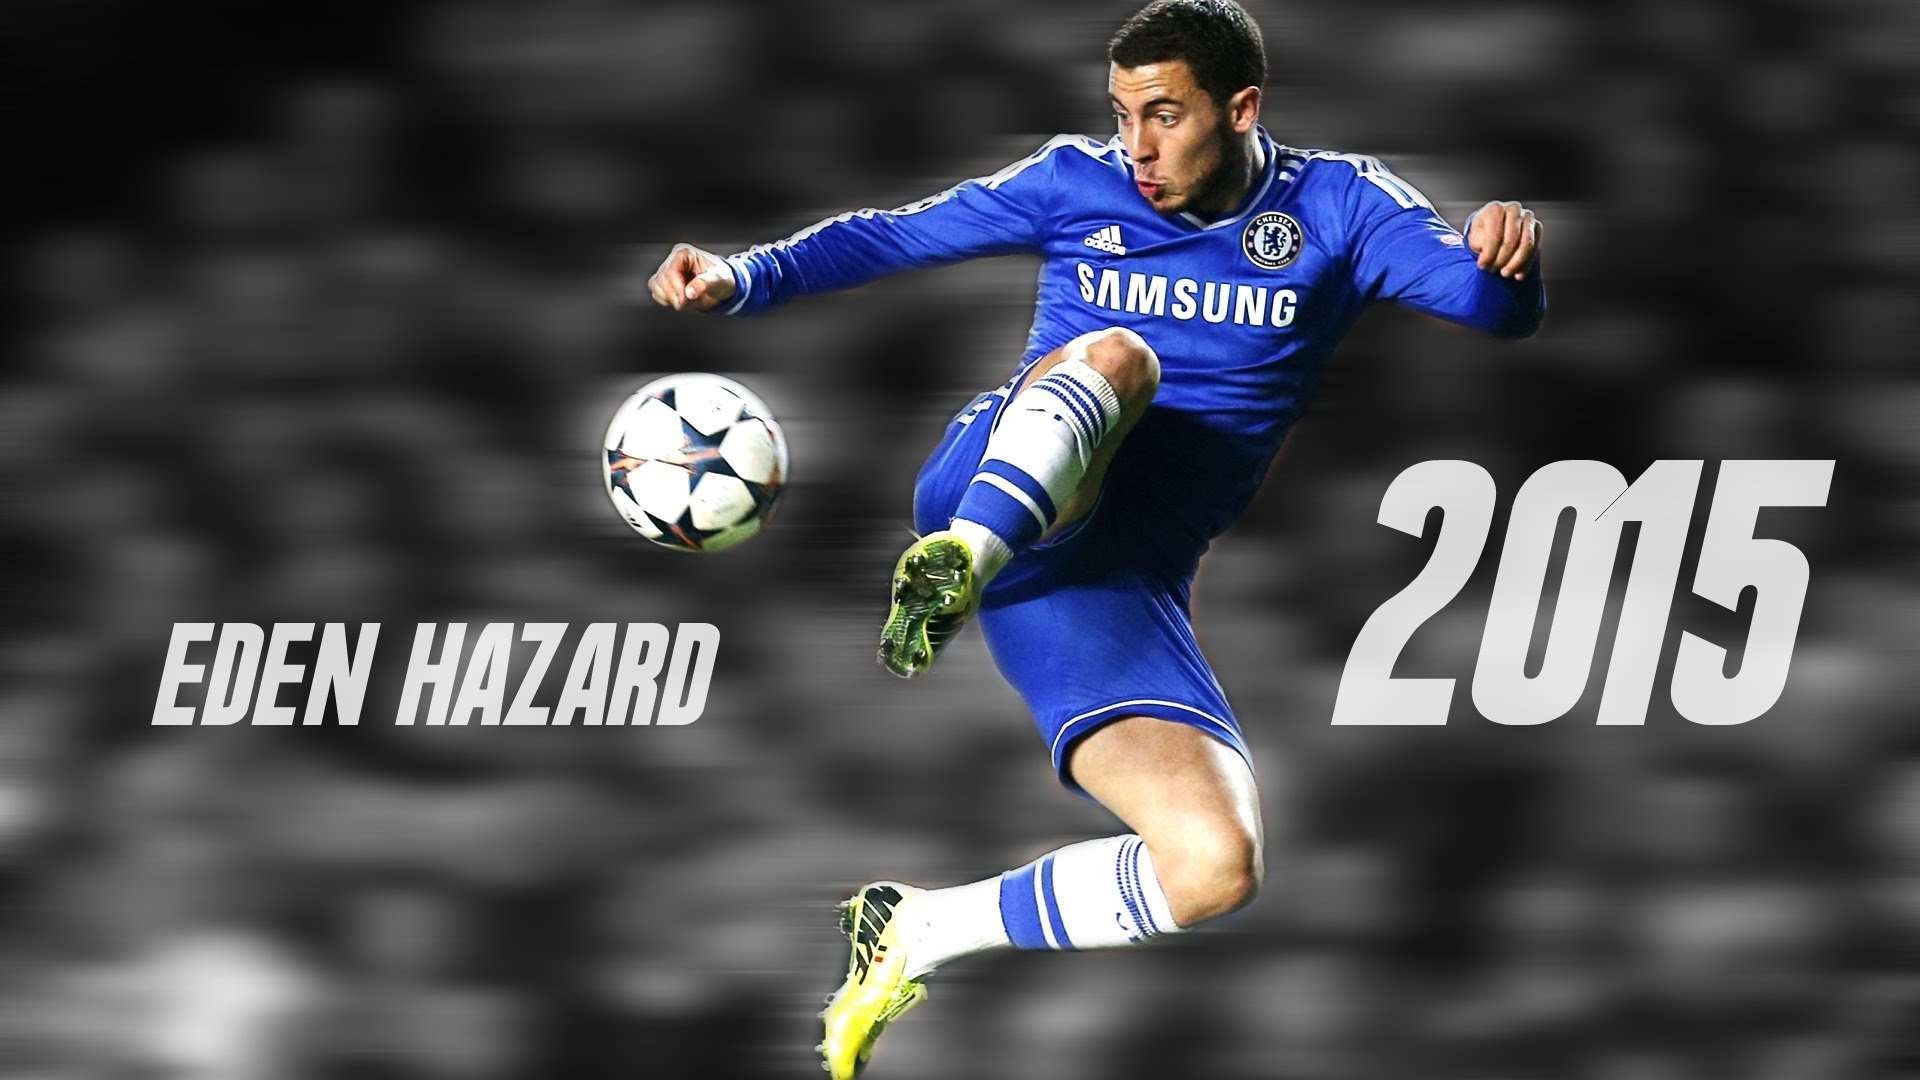 1920x1080 Eden Hazard wallpaper and Theme for Windows | All for Windows 10 Free